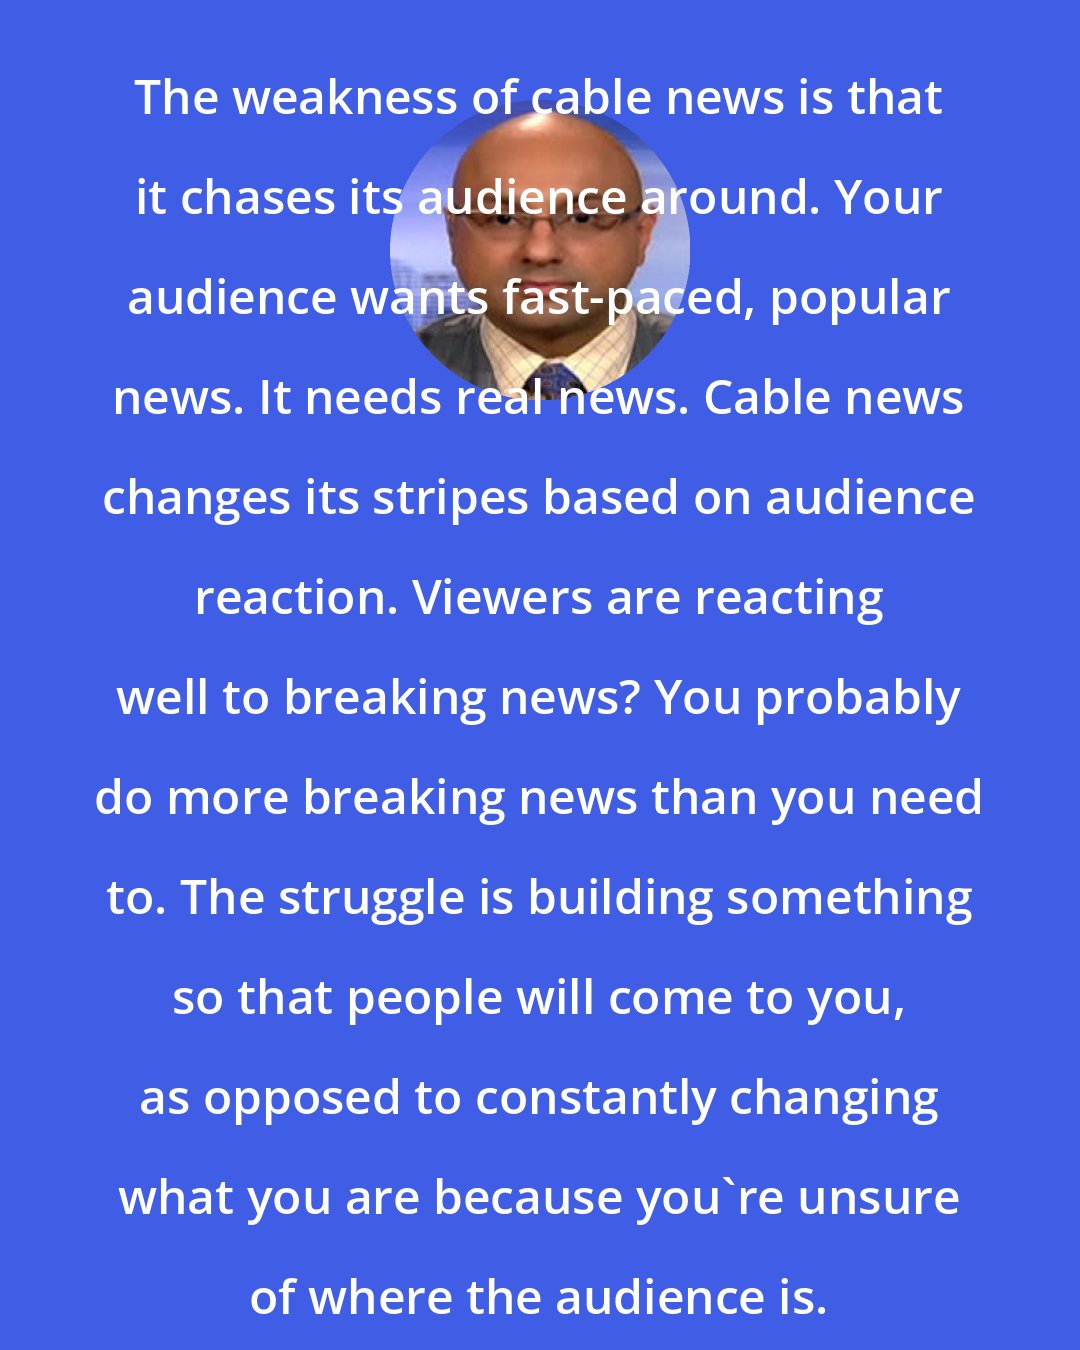 Ali Velshi: The weakness of cable news is that it chases its audience around. Your audience wants fast-paced, popular news. It needs real news. Cable news changes its stripes based on audience reaction. Viewers are reacting well to breaking news? You probably do more breaking news than you need to. The struggle is building something so that people will come to you, as opposed to constantly changing what you are because you're unsure of where the audience is.